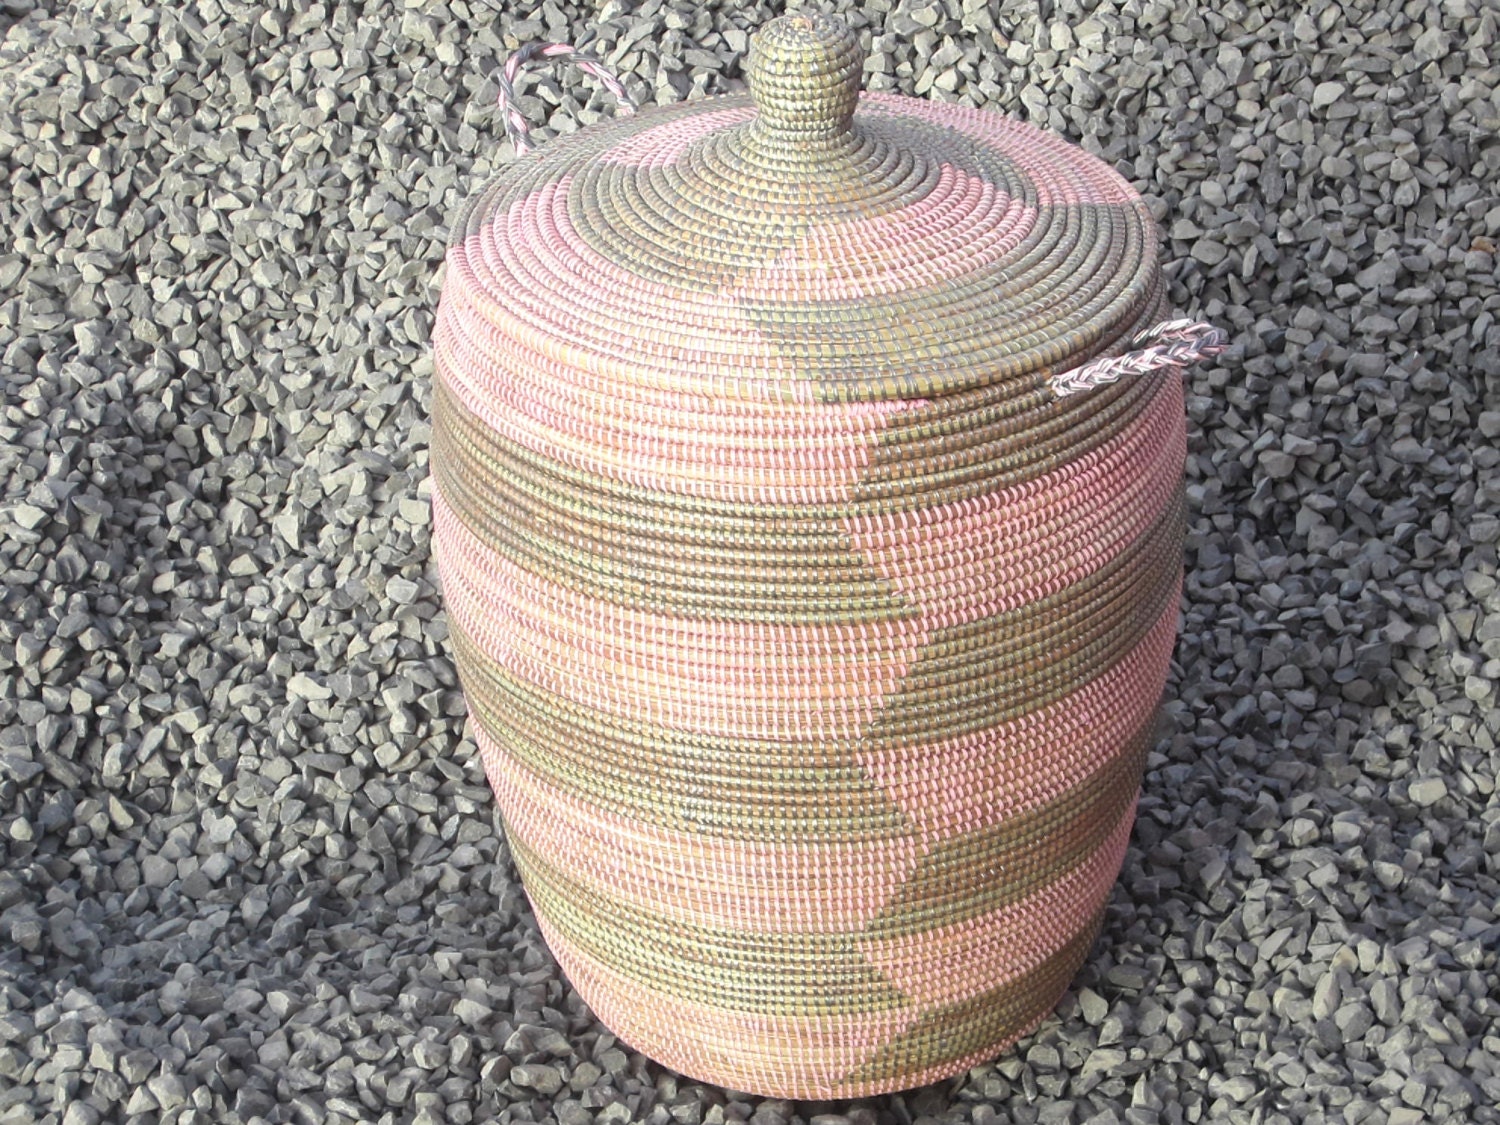 soft pink and grey laundry basket, chevron, rose and gray hamper, wicker, basket weaving, WÃ¤schekorb - africanbaskets